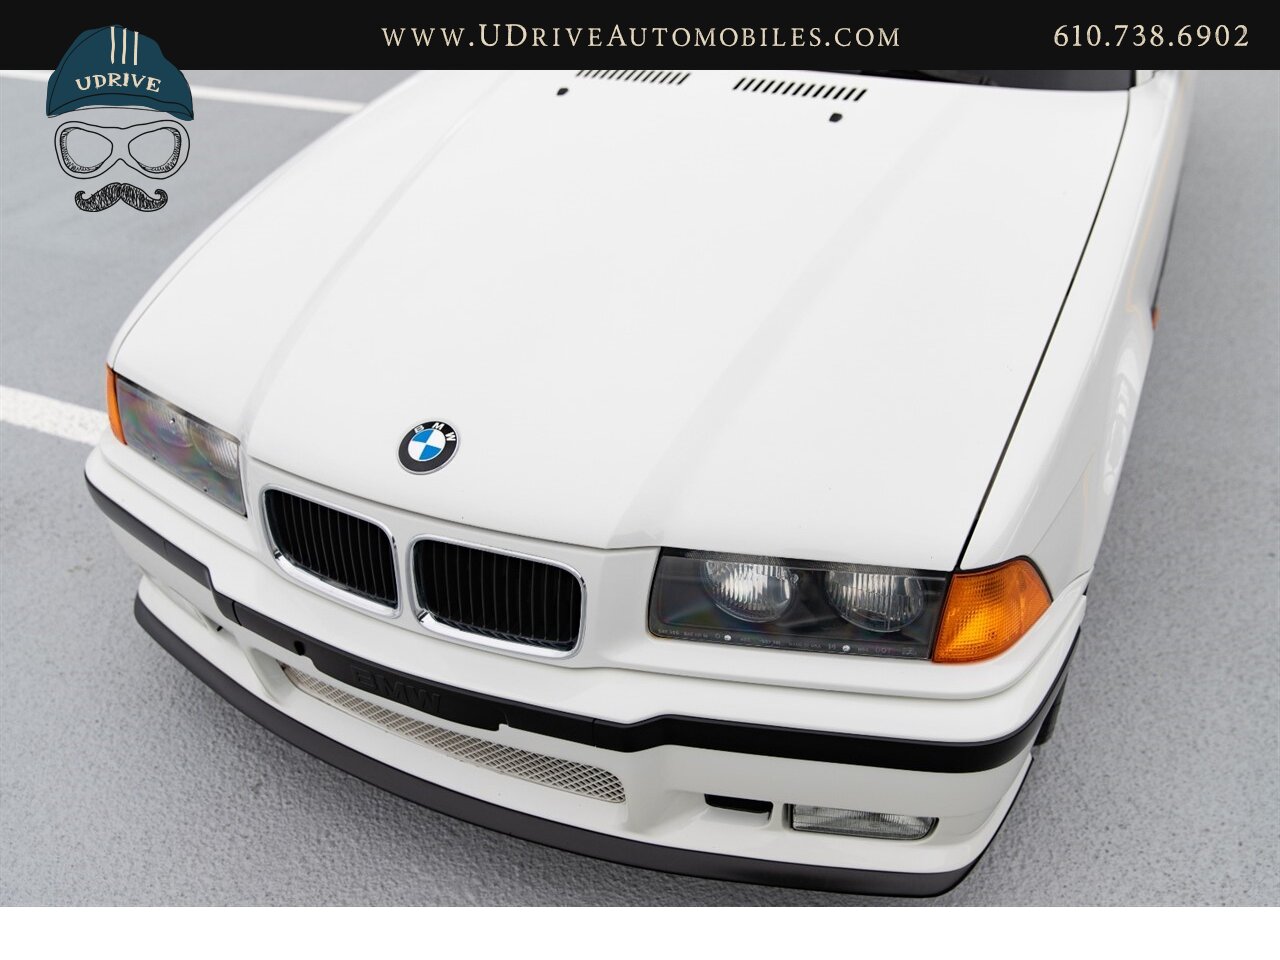 1995 BMW M3 E36 Alpine White over Black Vader Seats  5 Speed - Photo 9 - West Chester, PA 19382